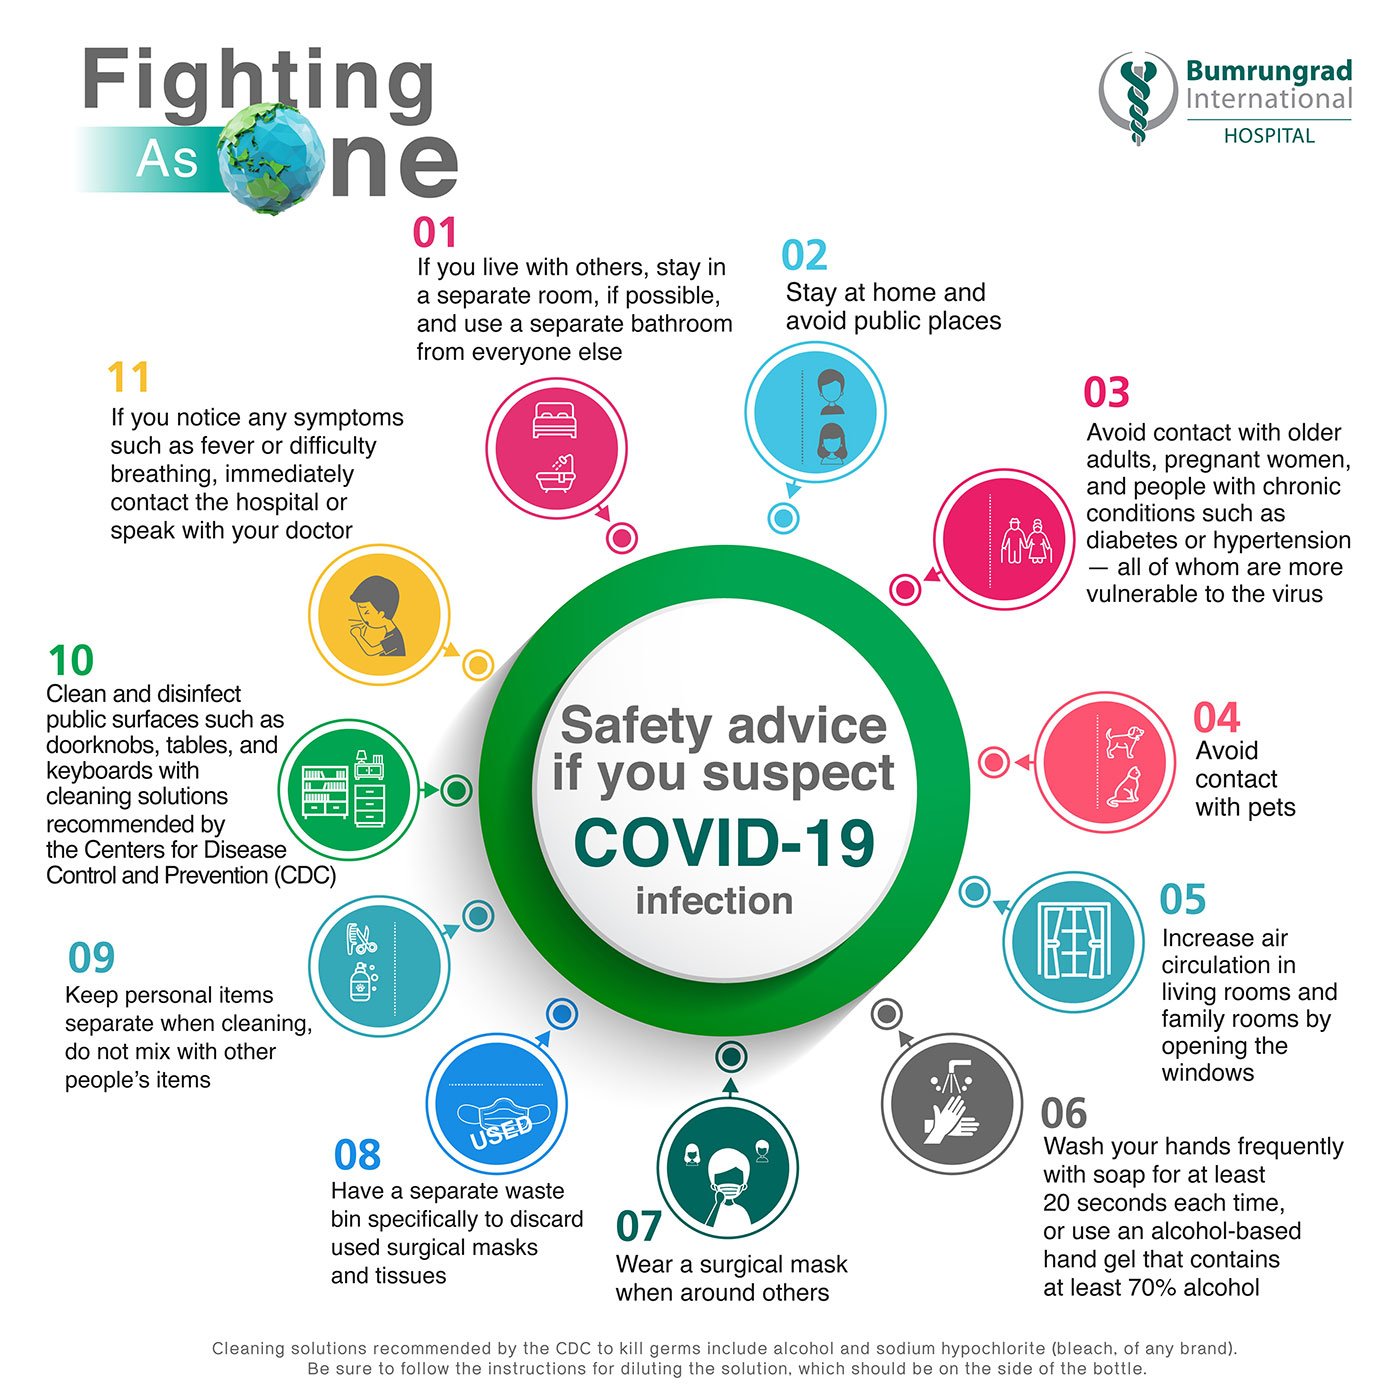 Infographic_safetycovid19_website.jpg